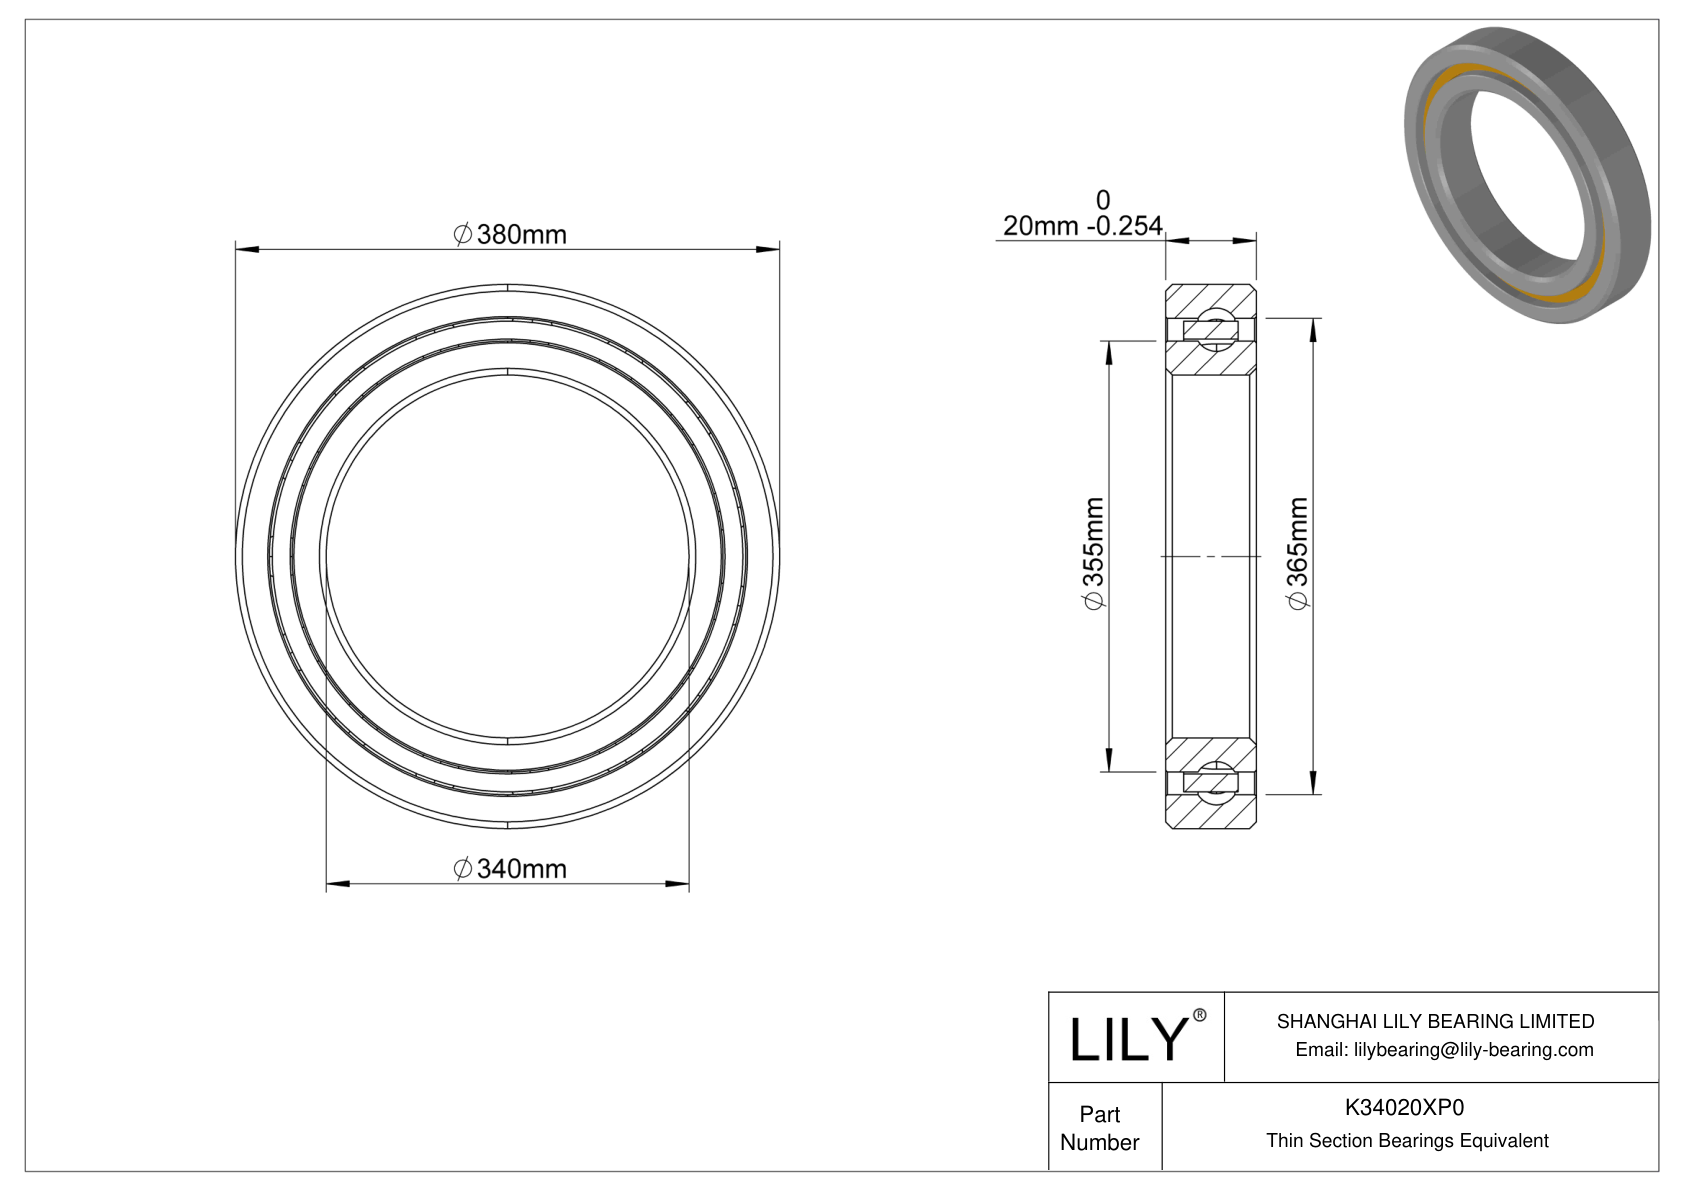 K34020XP0 Constant Section (CS) Bearings cad drawing